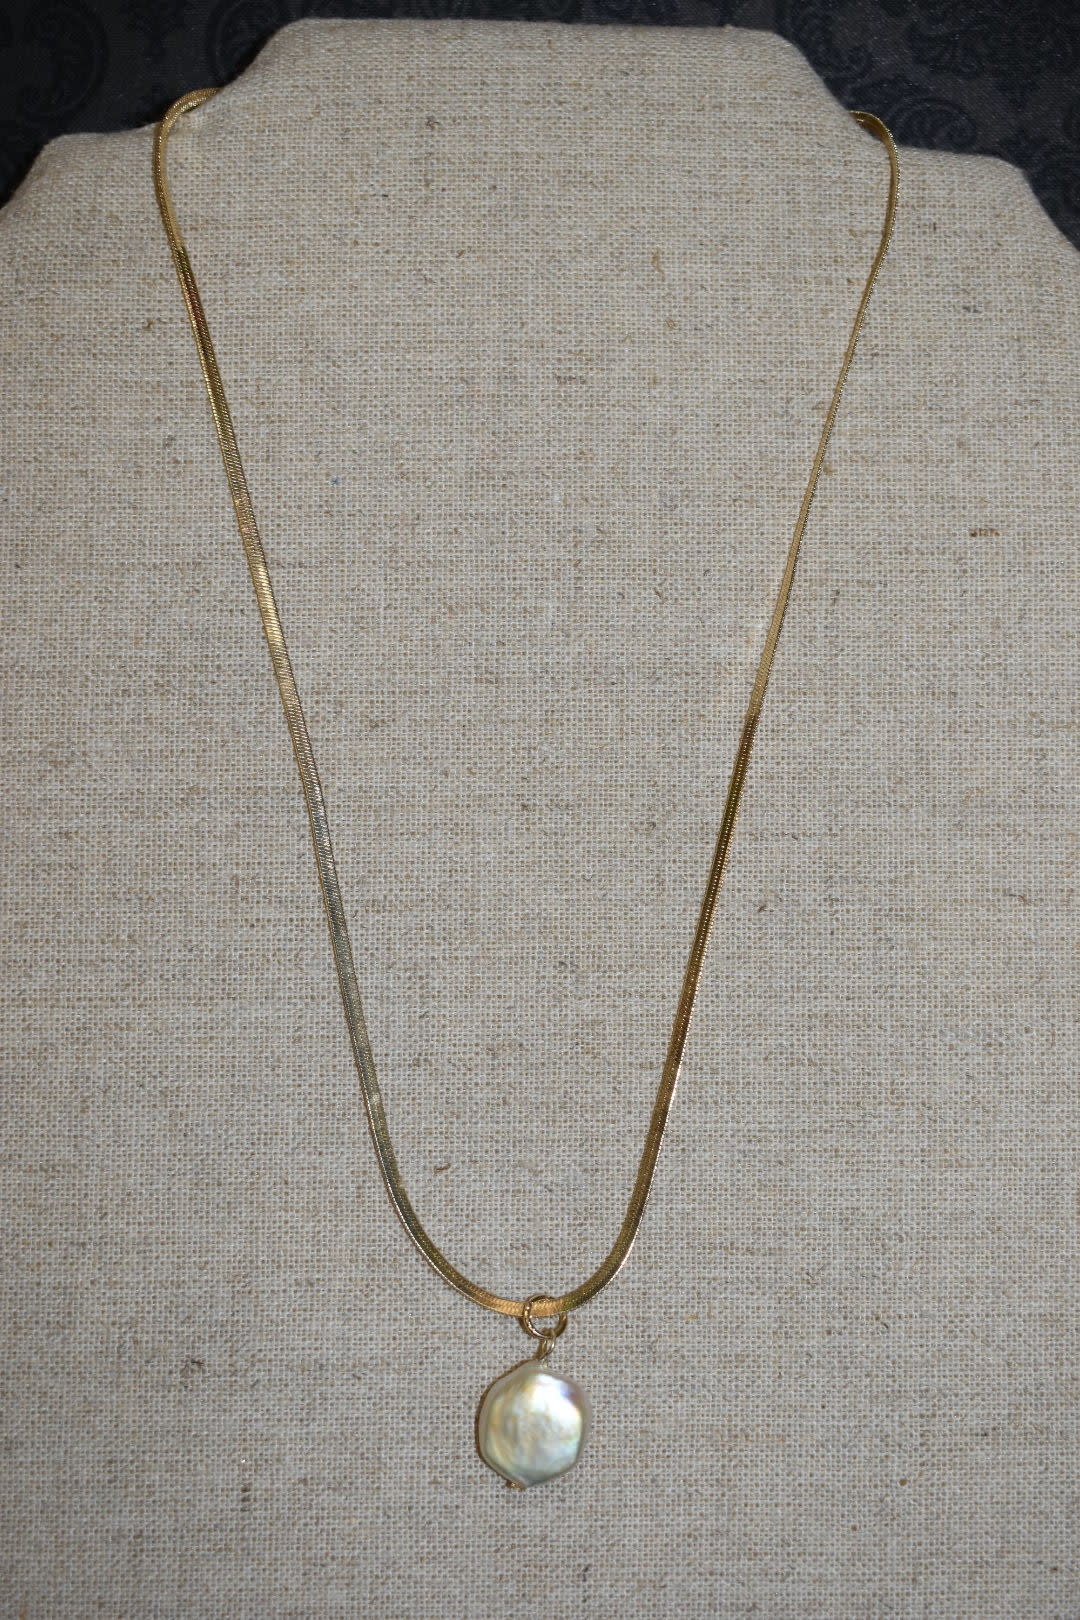 available at m. lynne designs Gold Chain Necklace with Single Pearl Drop